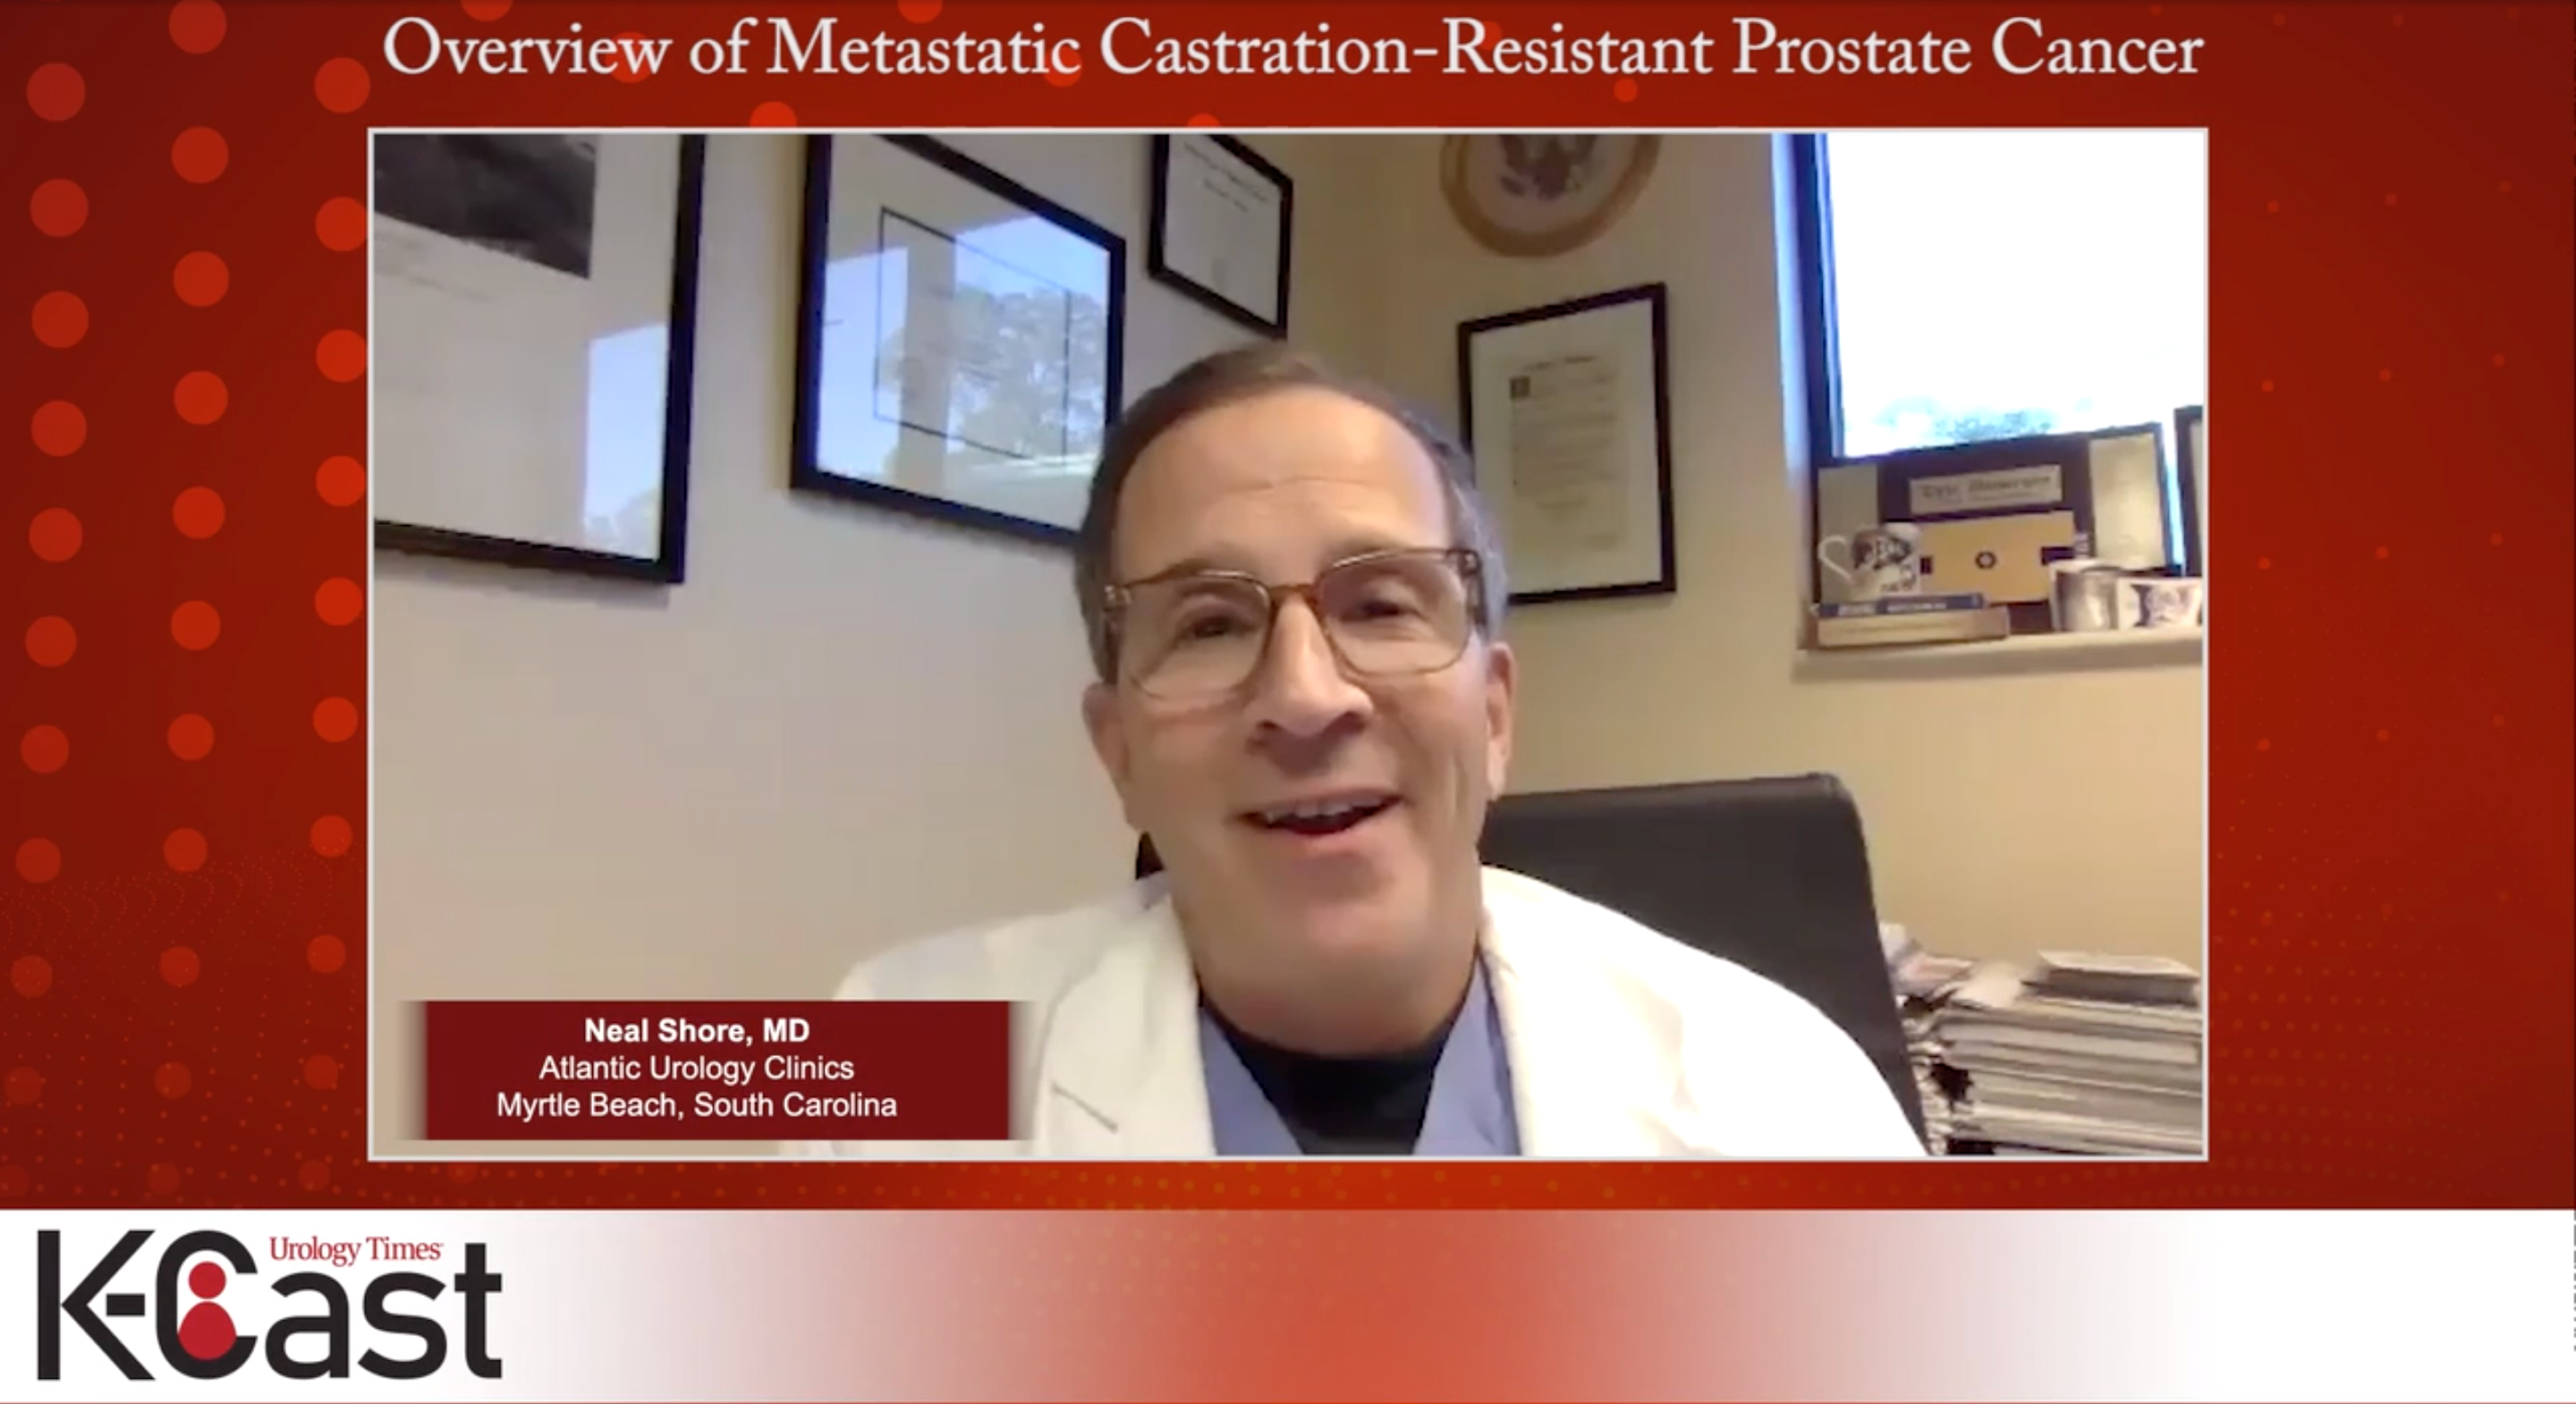 COVID-19 and Treating Metastatic Castration-Resistant Prostate Cancer